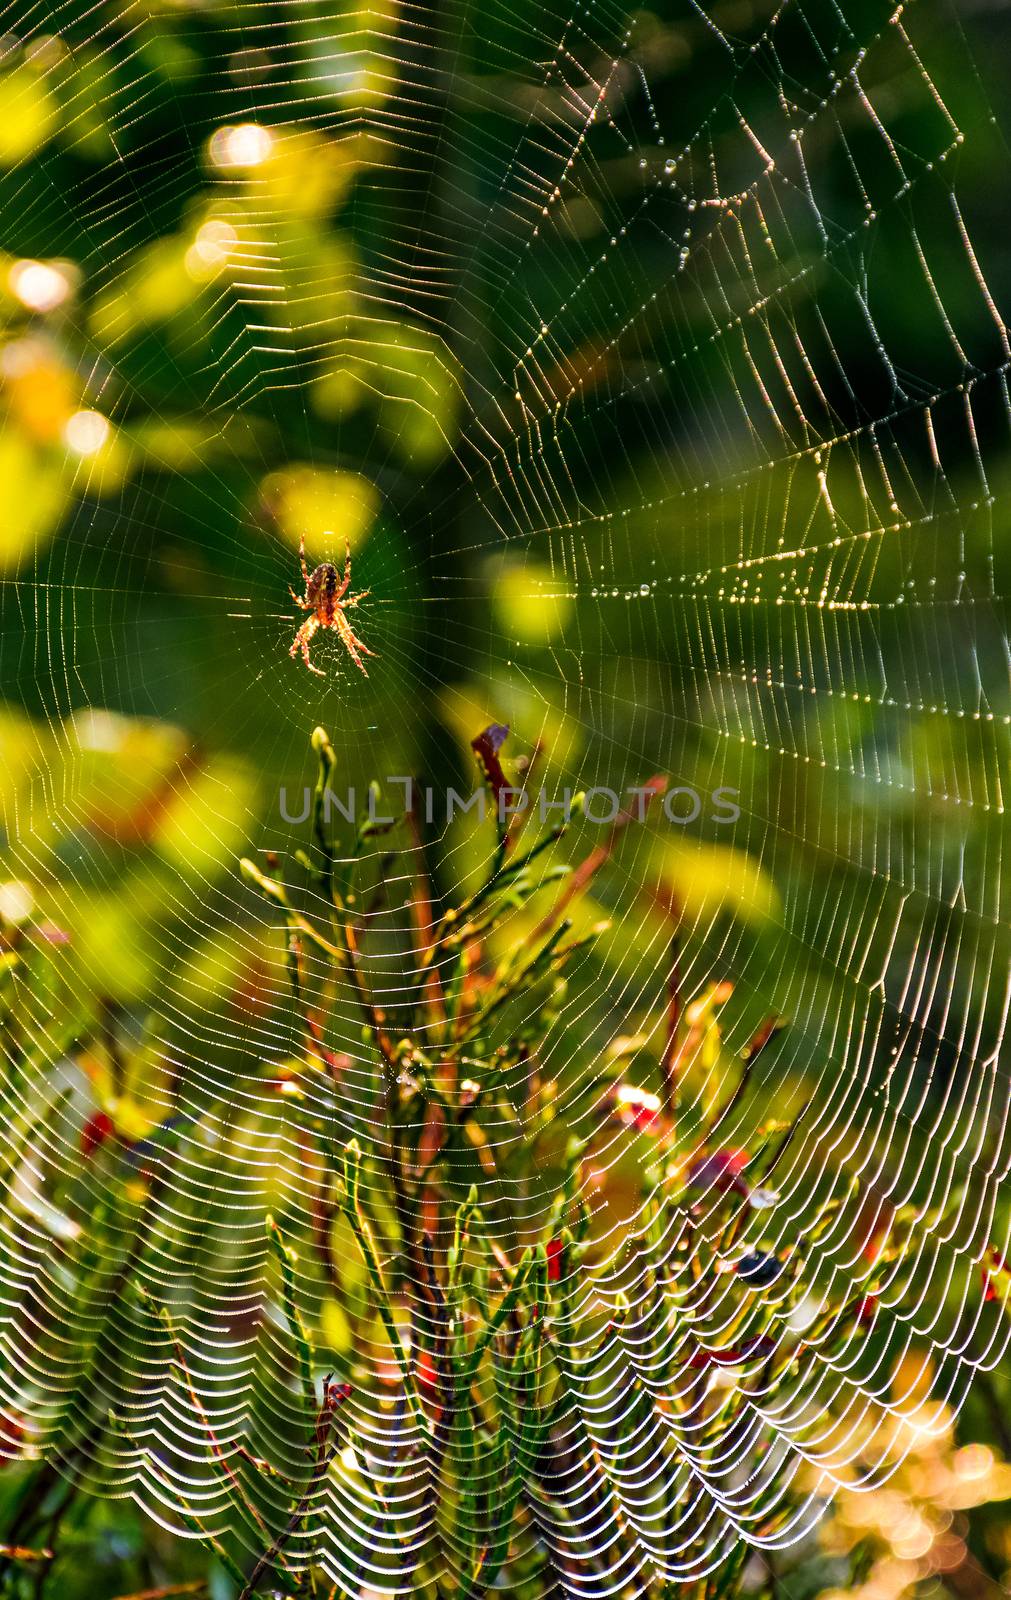 red spider in the web on beautiful foliage bokeh by Pellinni